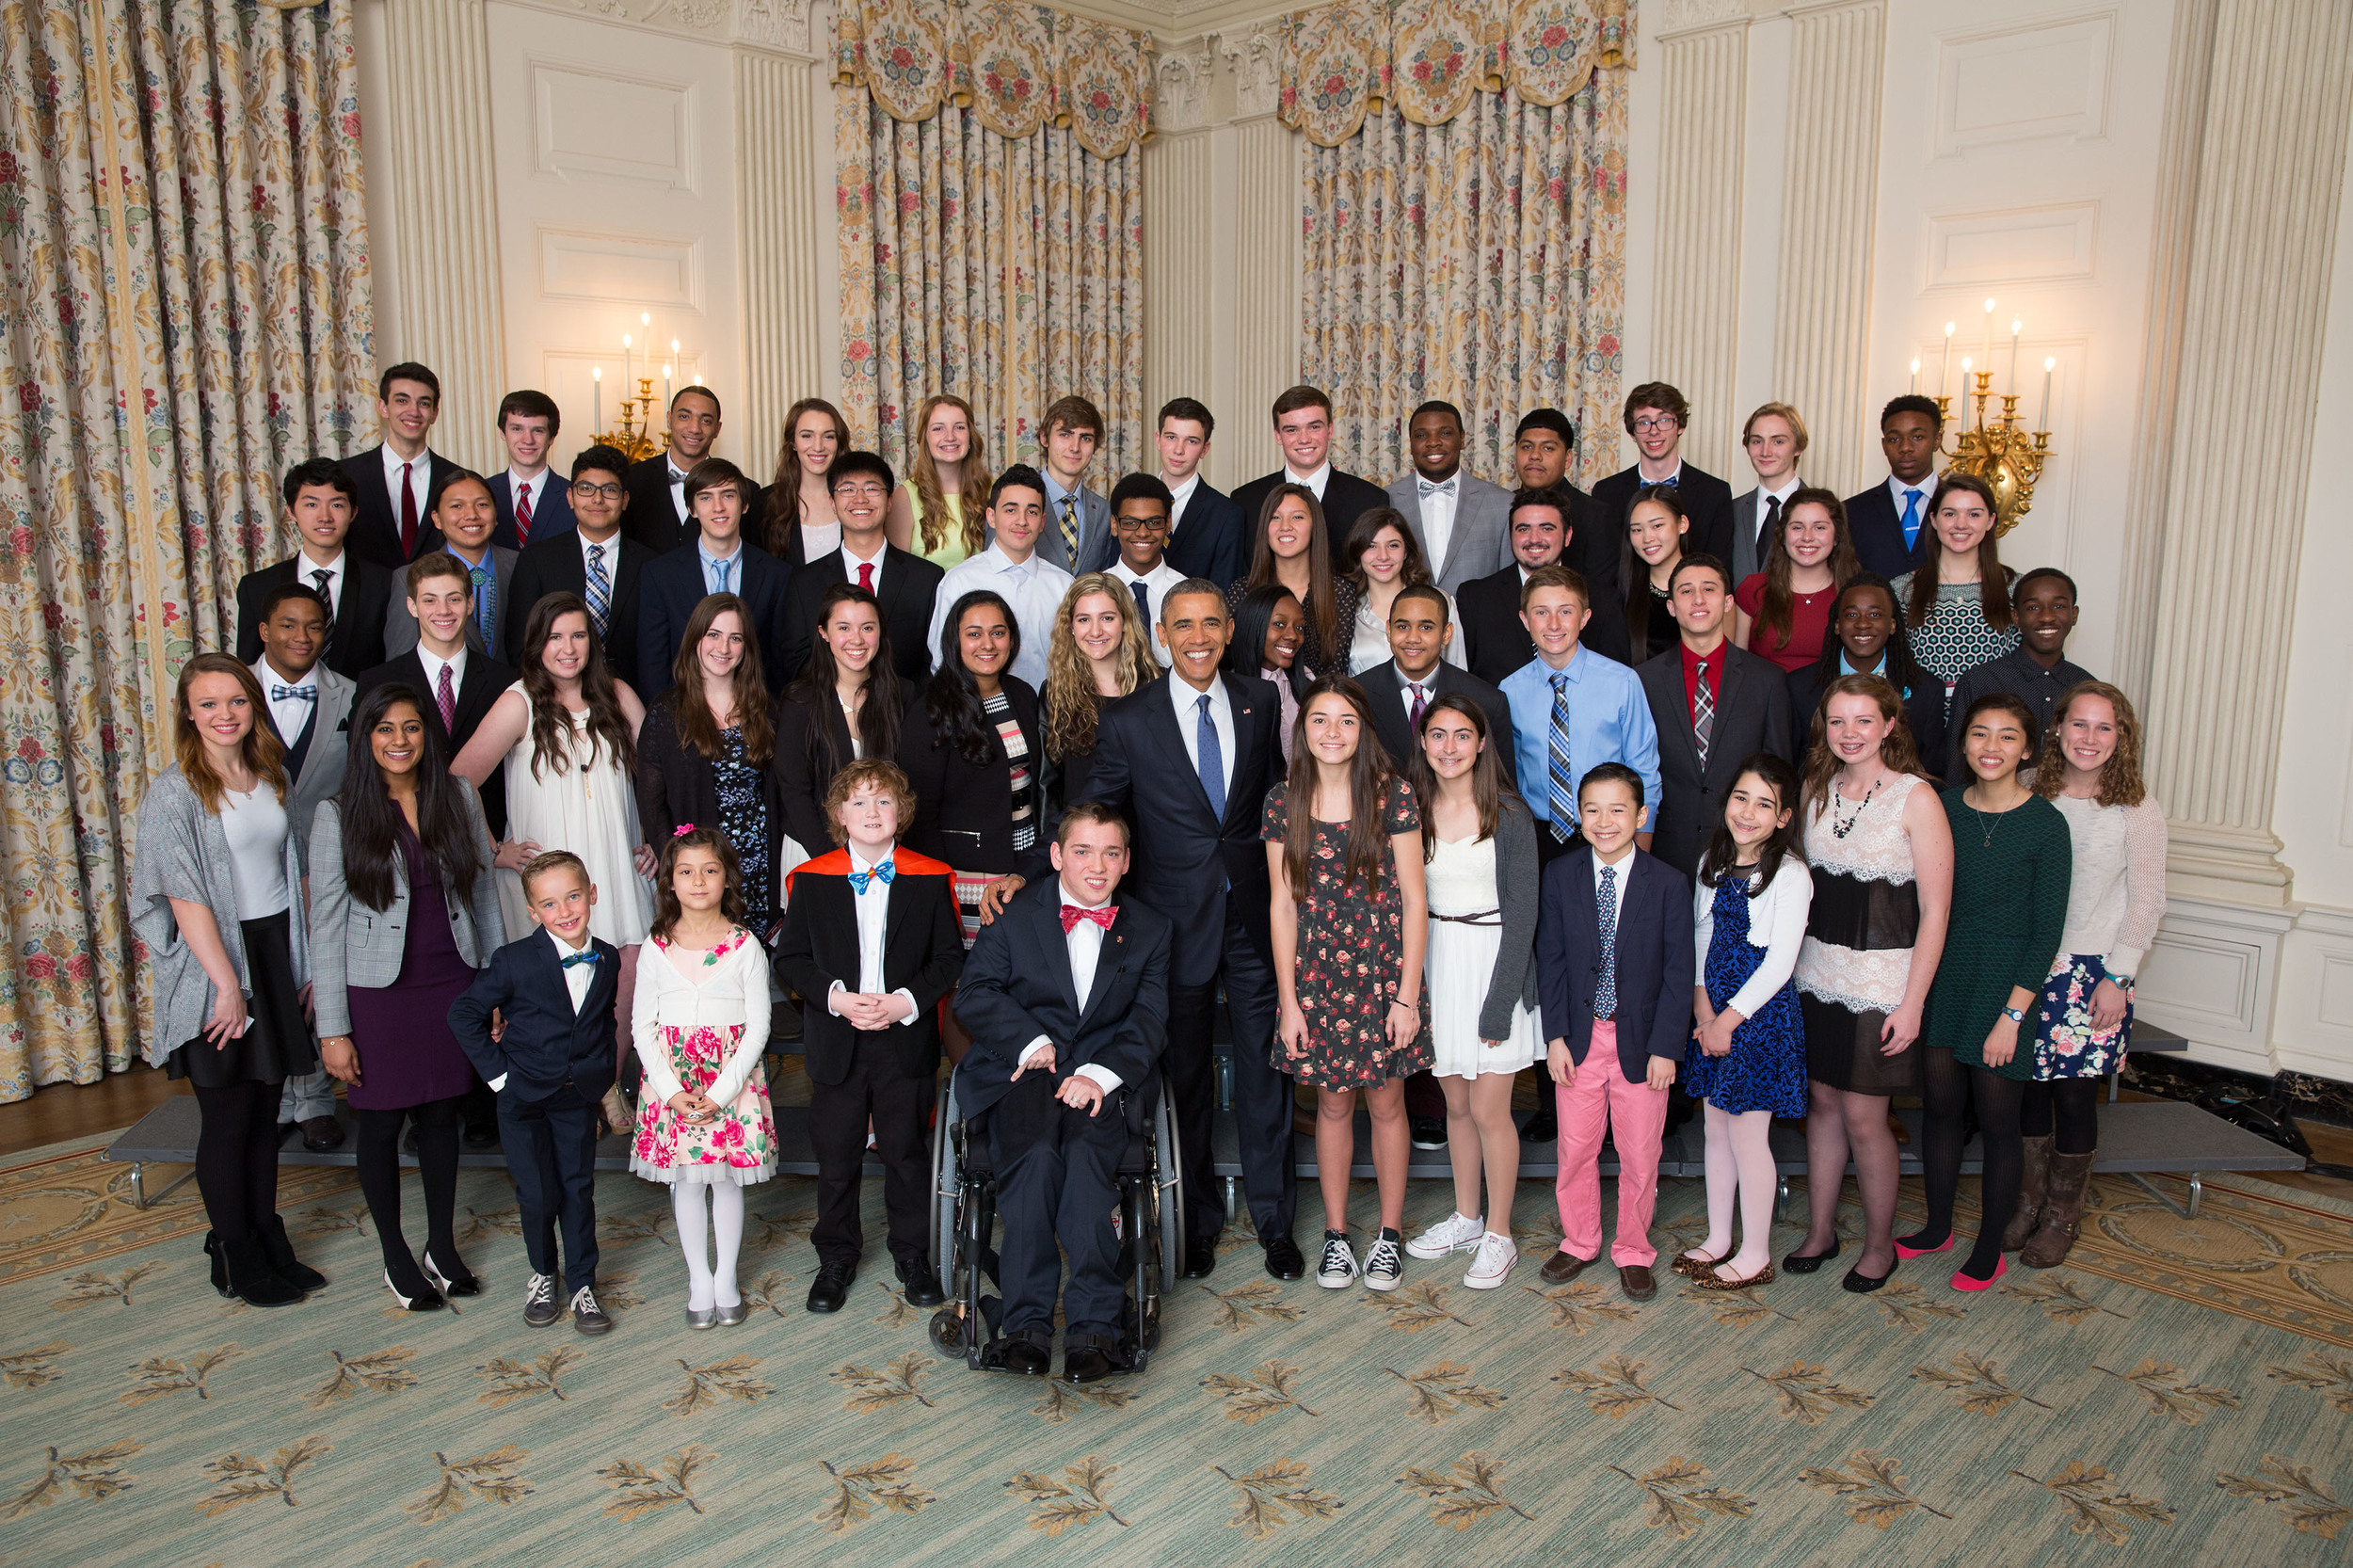 President Obama photo op with winners of 2015 White House Student Film Festival Official White House Photo by Pete Souza front.jpg